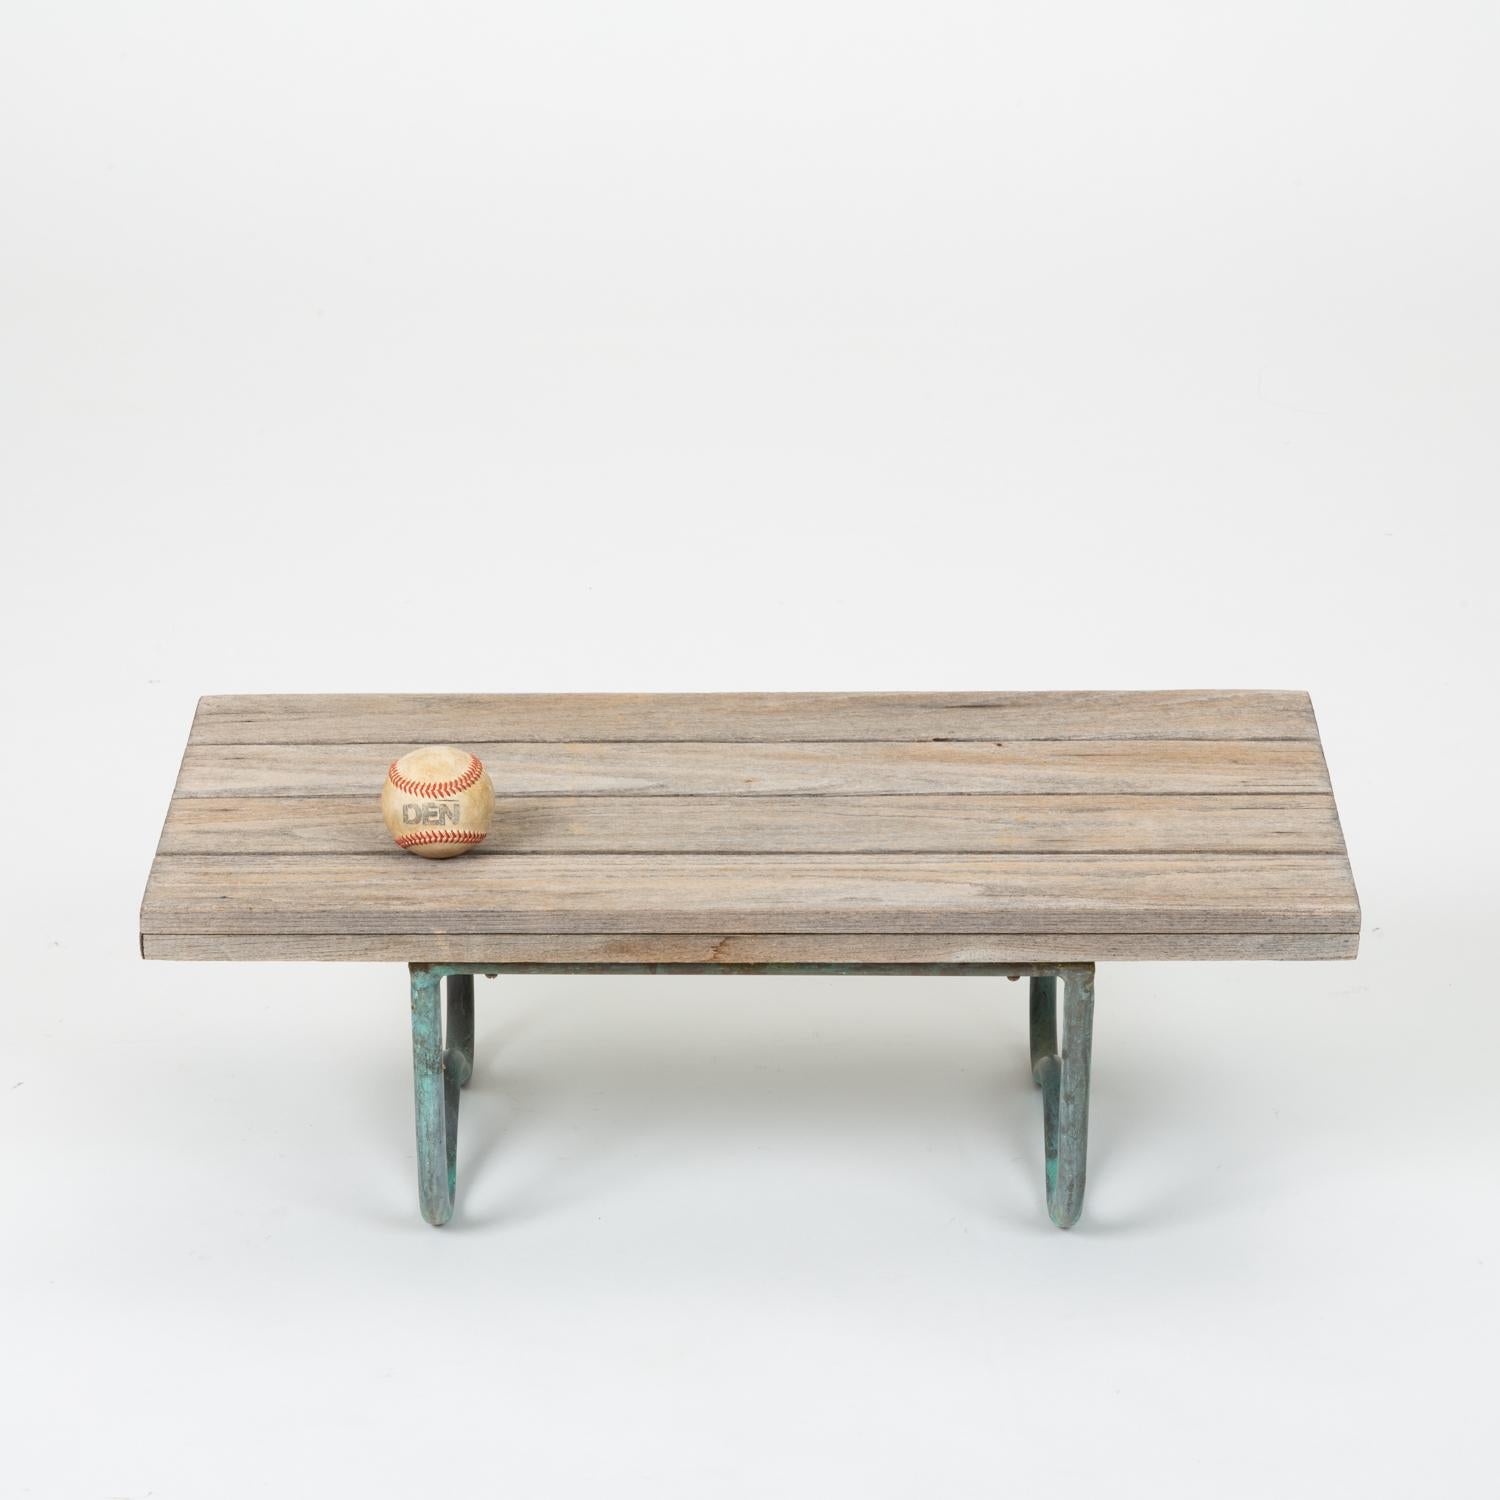 Bronze Wooden Top Side Tables by Walter Lamb for Brown Jordan